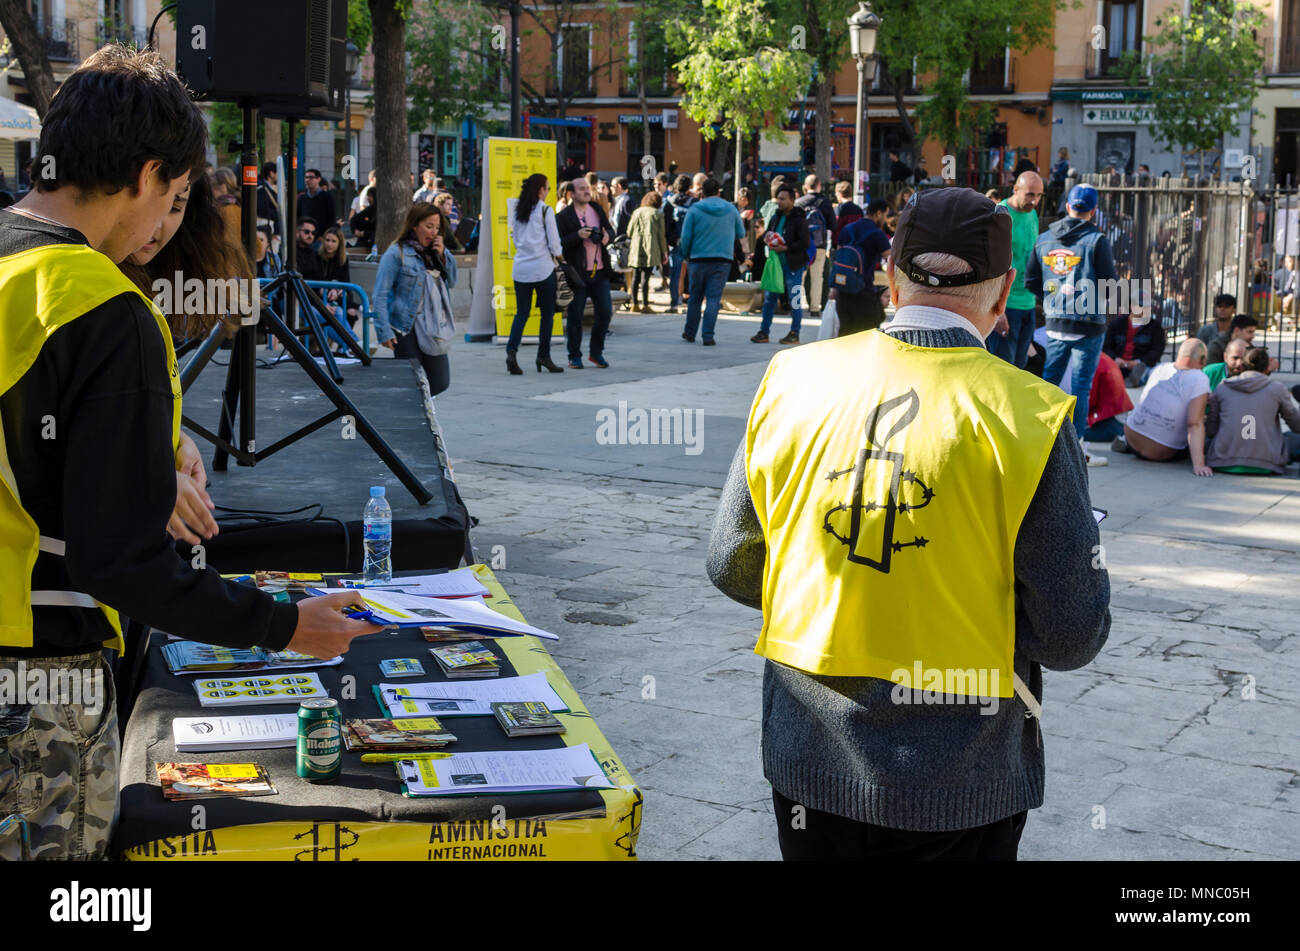 Young People In Dos De Mayo Square With A Stand Of Amnistia Internacional Malasana Quarter Madrid City Spain Stock Photo Alamy